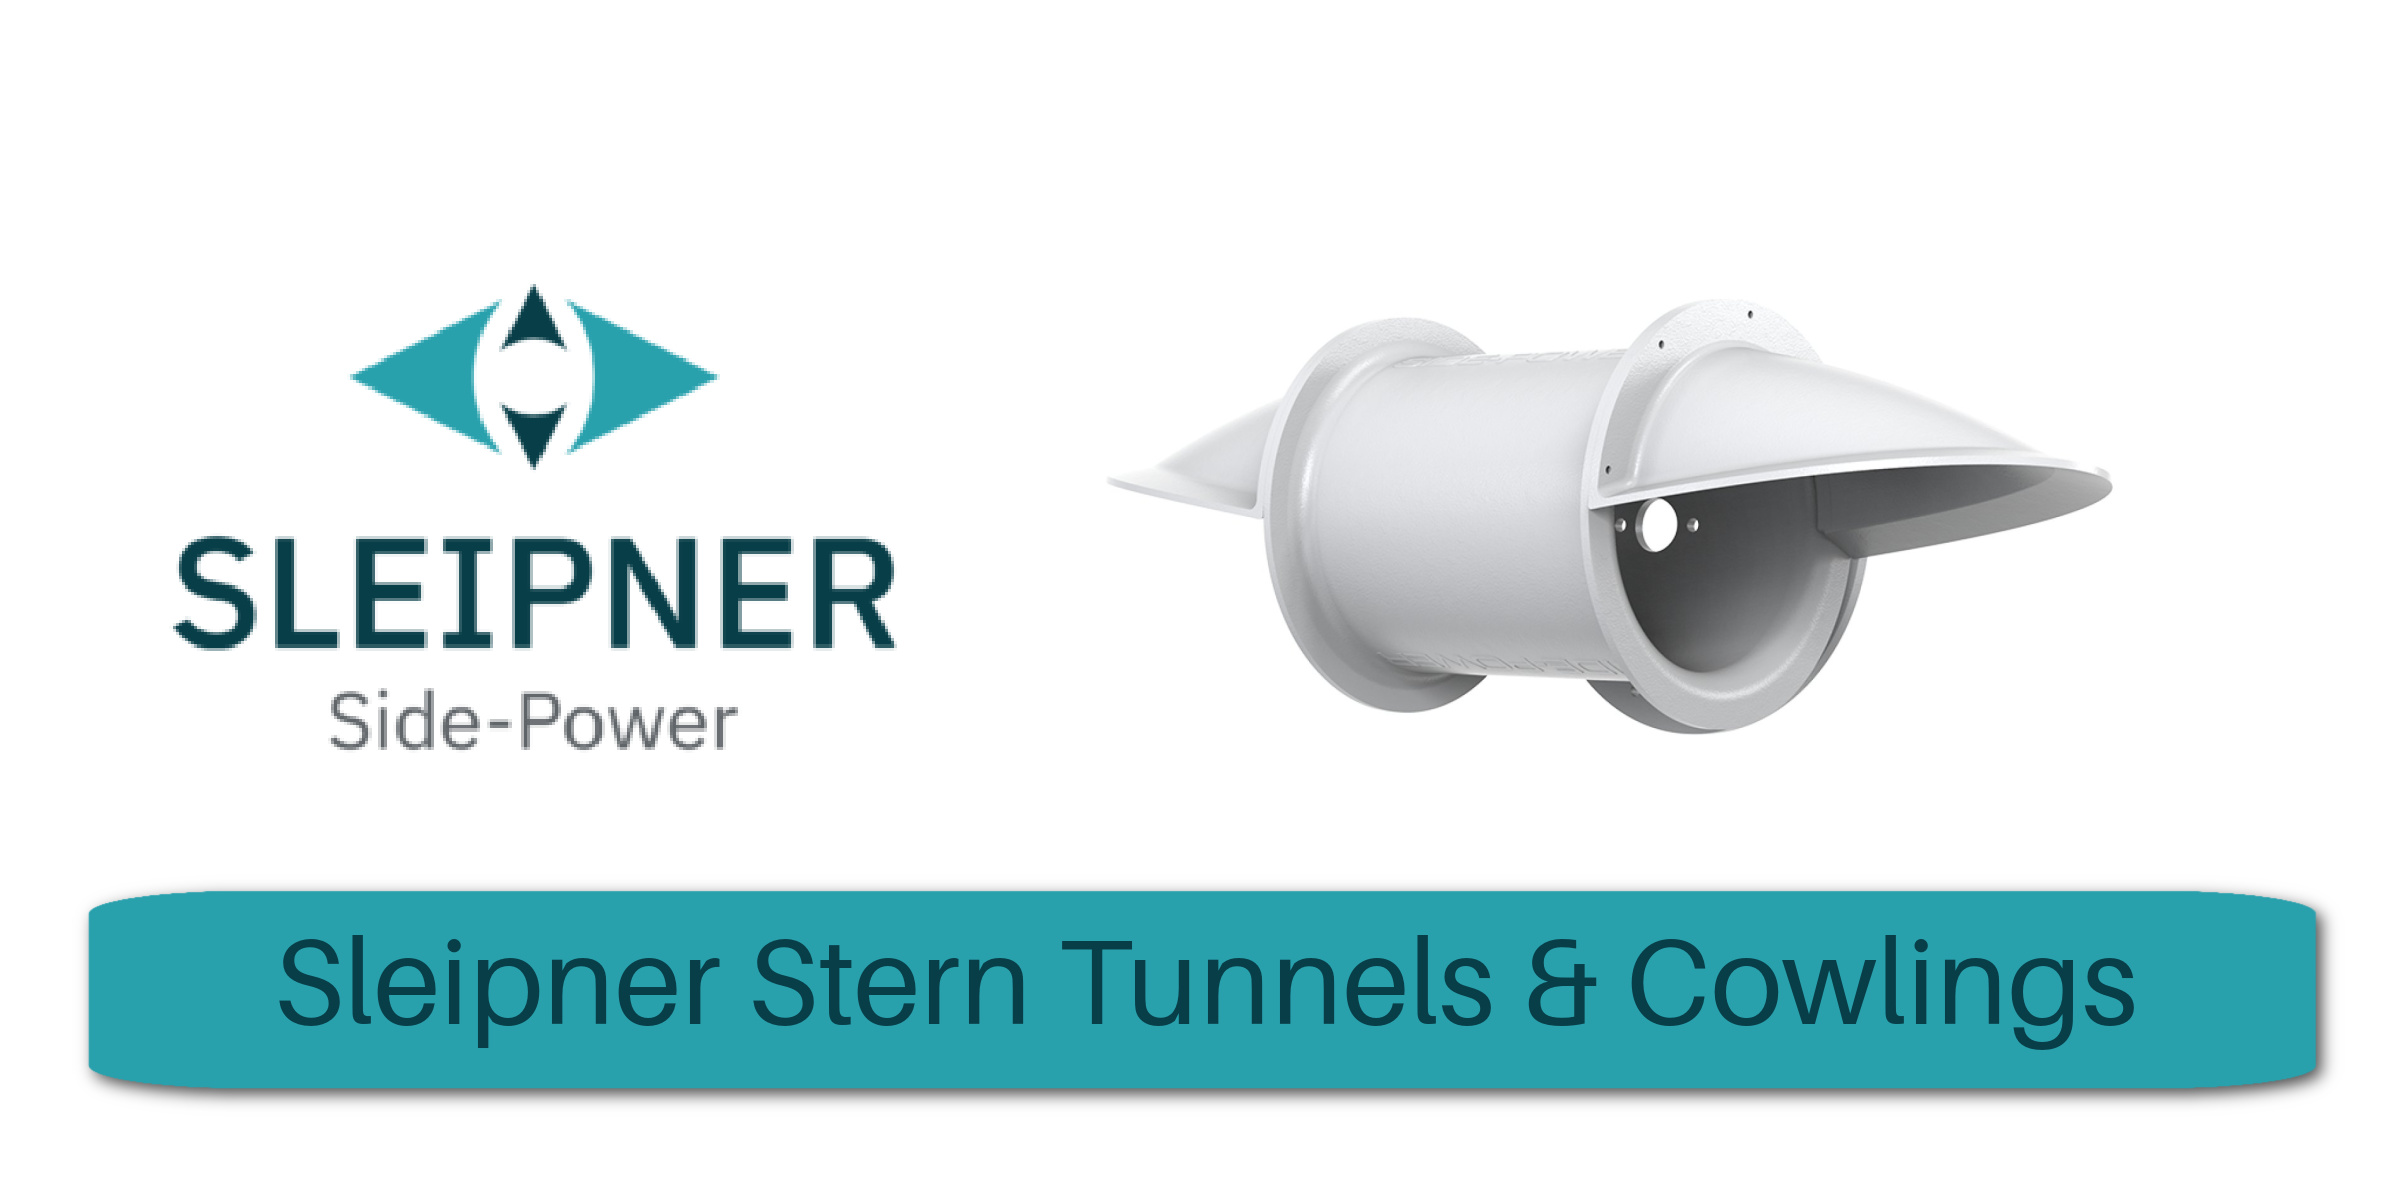 Sleipner Stern Tunnels and Cowlings